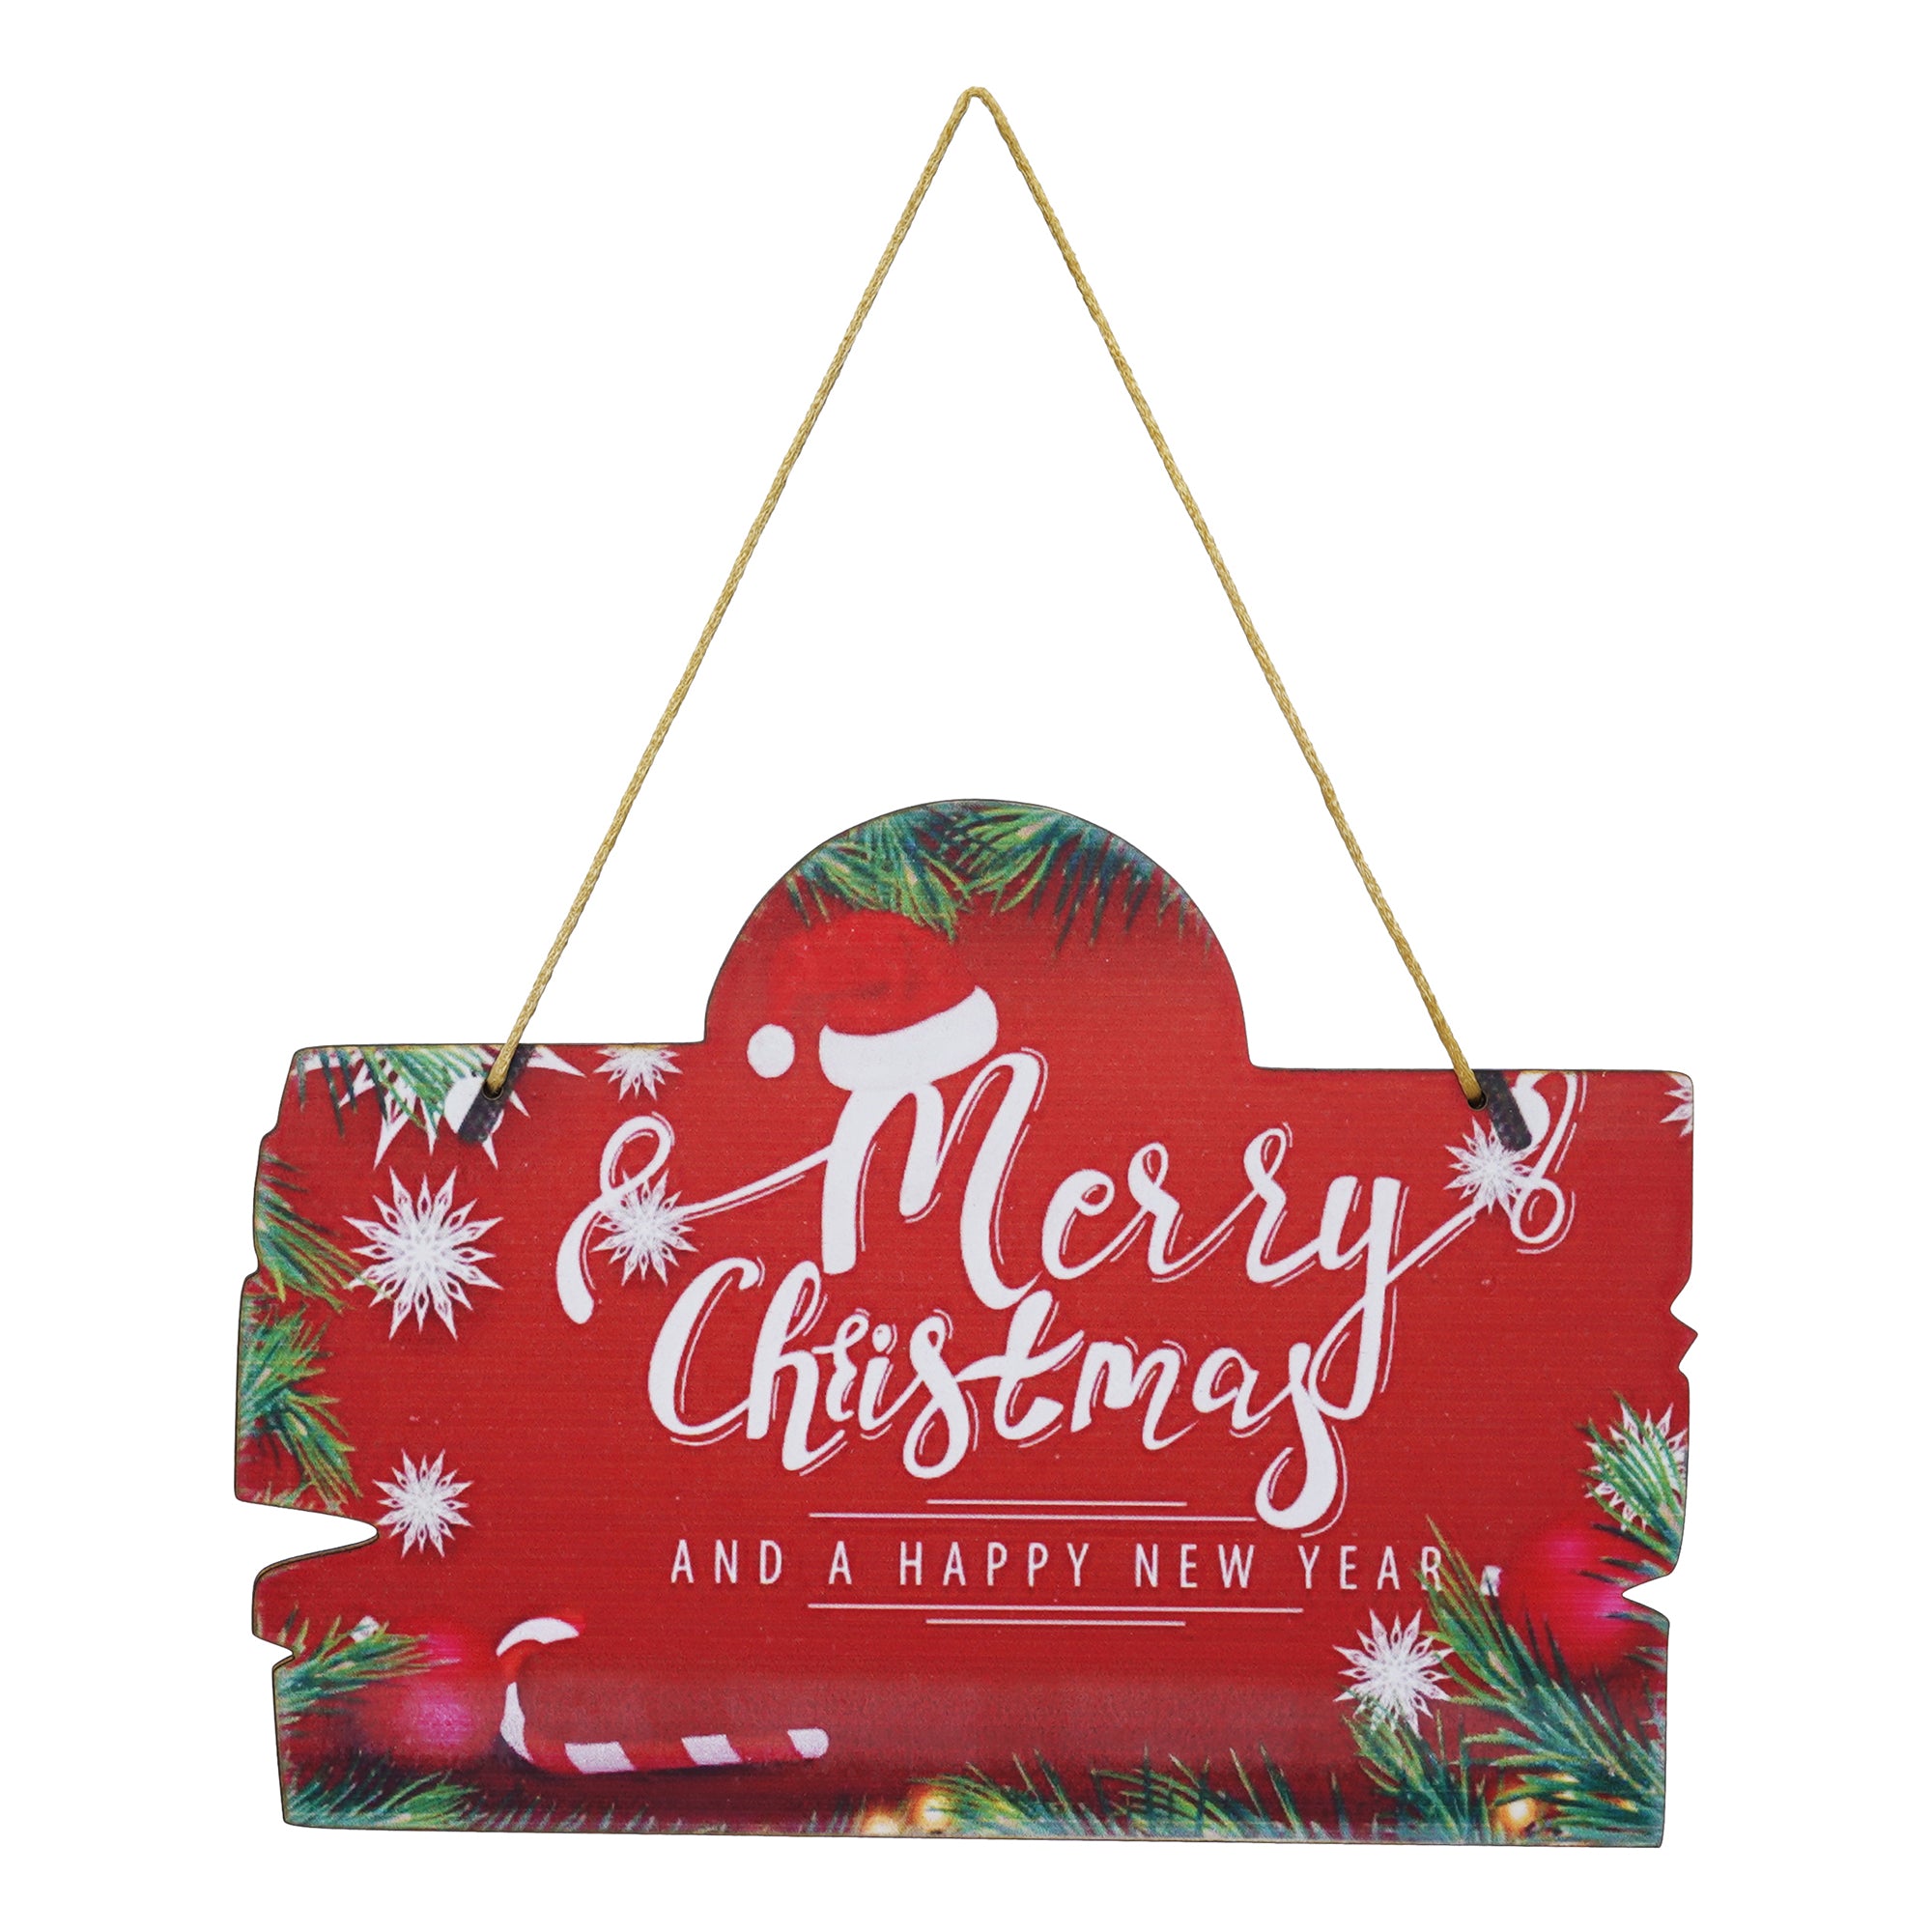 eCraftIndia "Merry Christmas and Happy New Year" Printed Door Wall Hanging for Home and Christmas Tree Decorations (Red, Green, White) 2